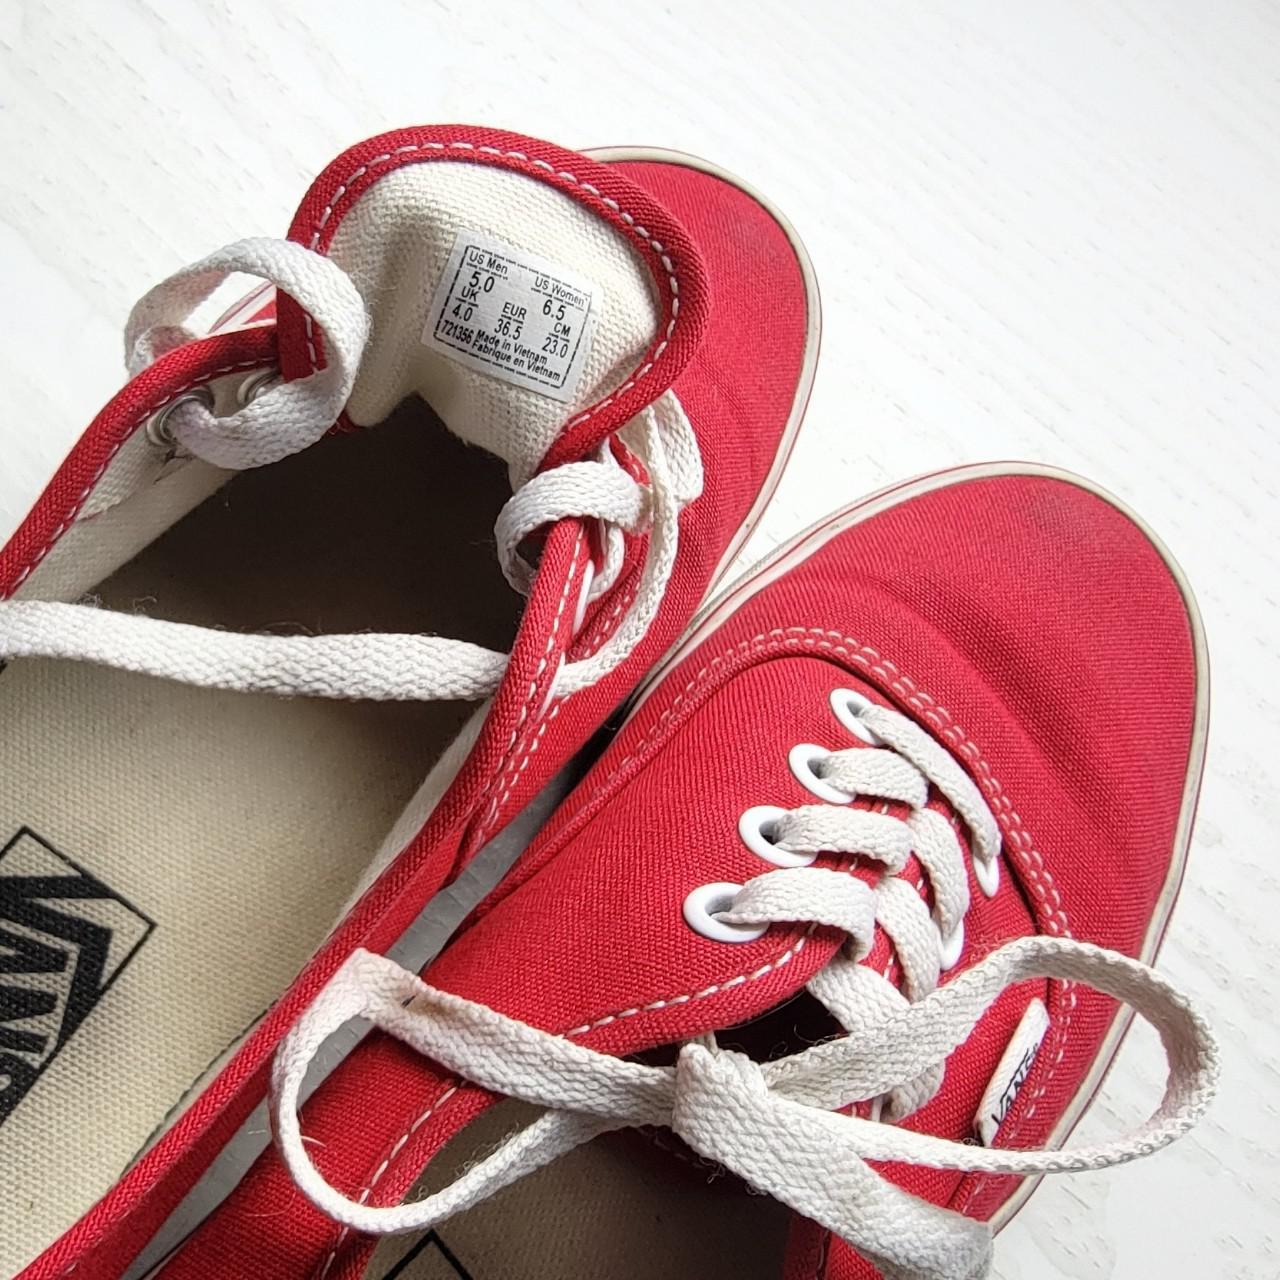 Vans Women's White and Red Trainers (3)